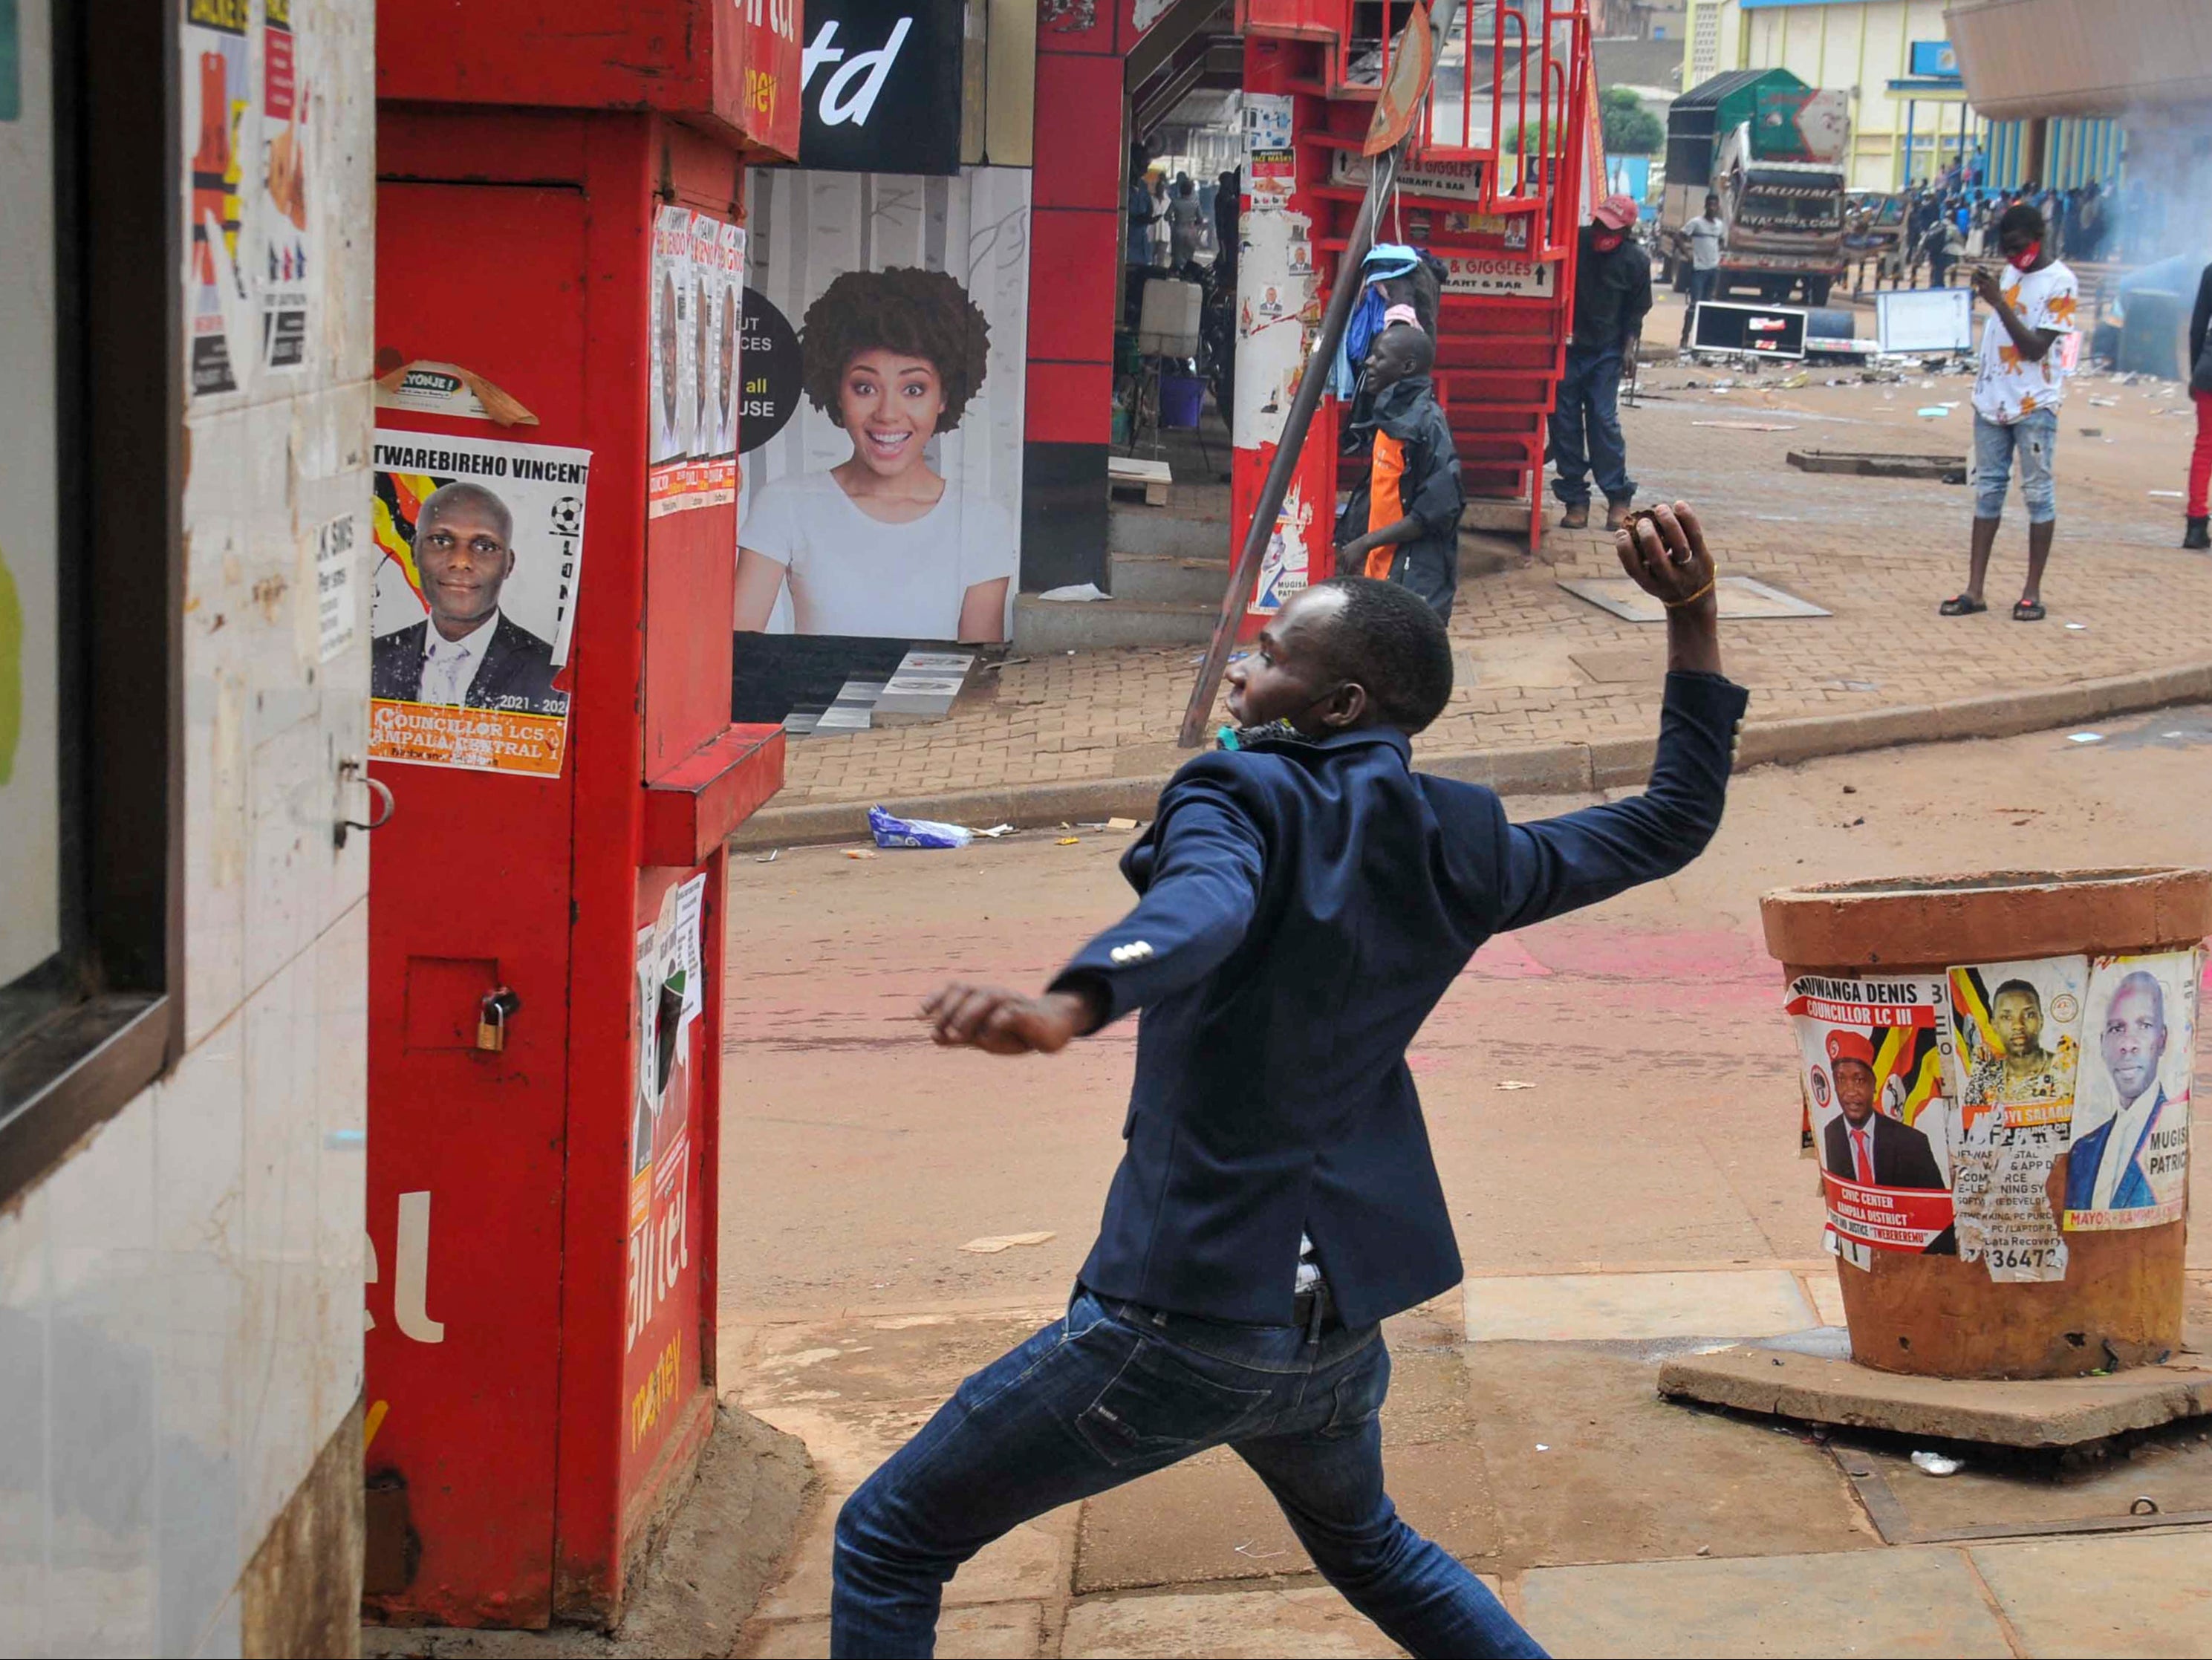 A man prepares to throw a rock during clashes between security forces and protesters supporting Bobi Wine, in Kampala, Uganda